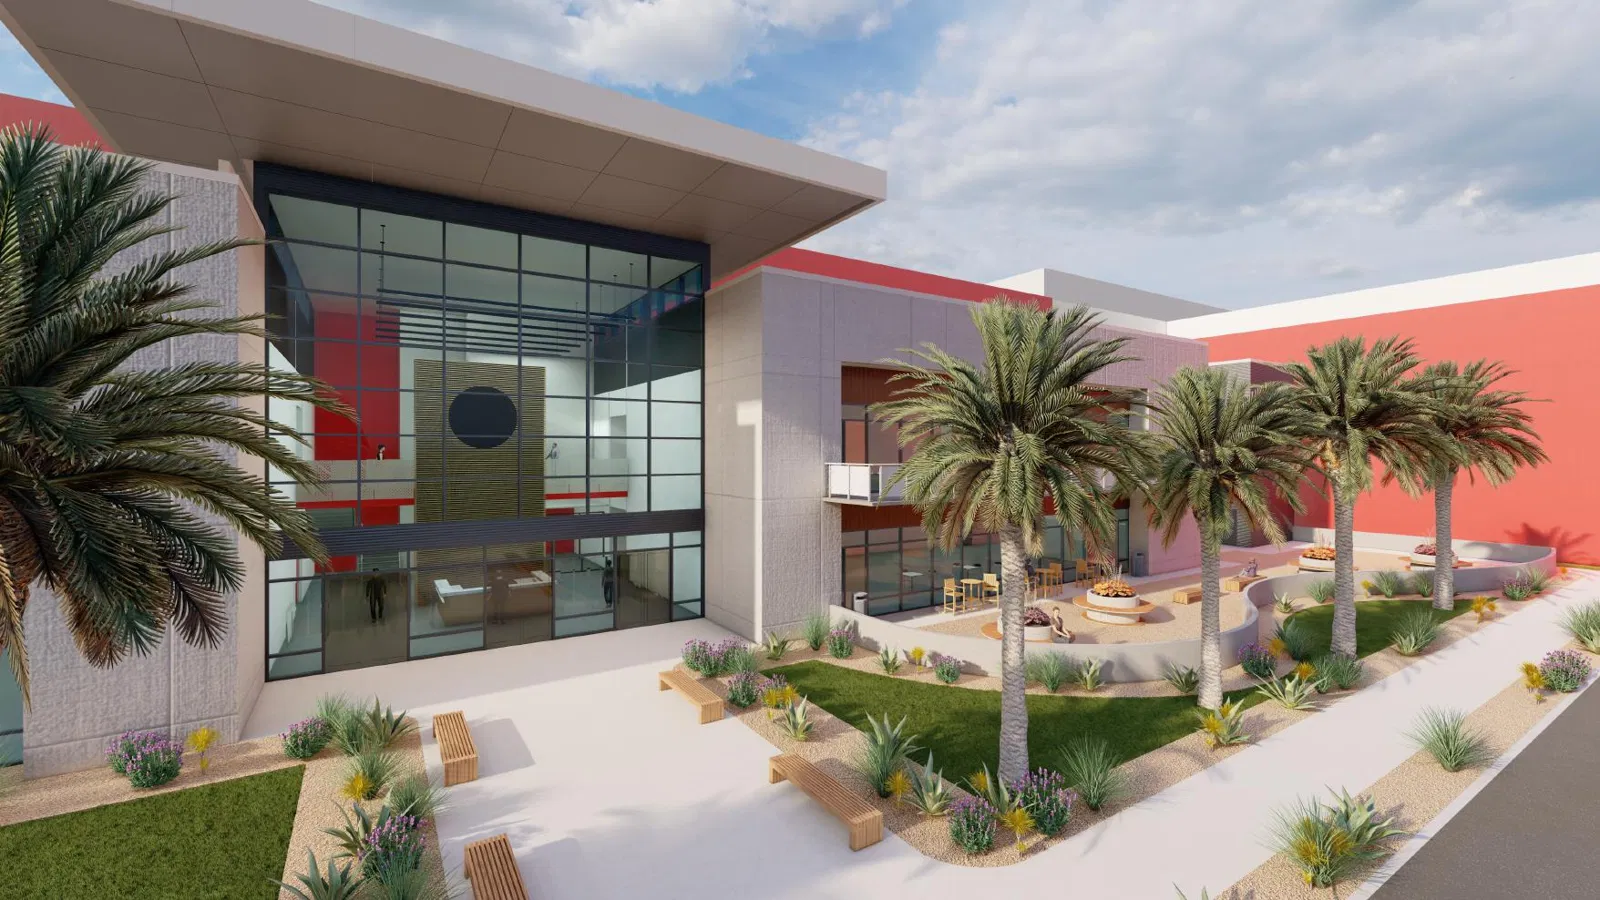 Render an image of the "Southern California Facility" entrance